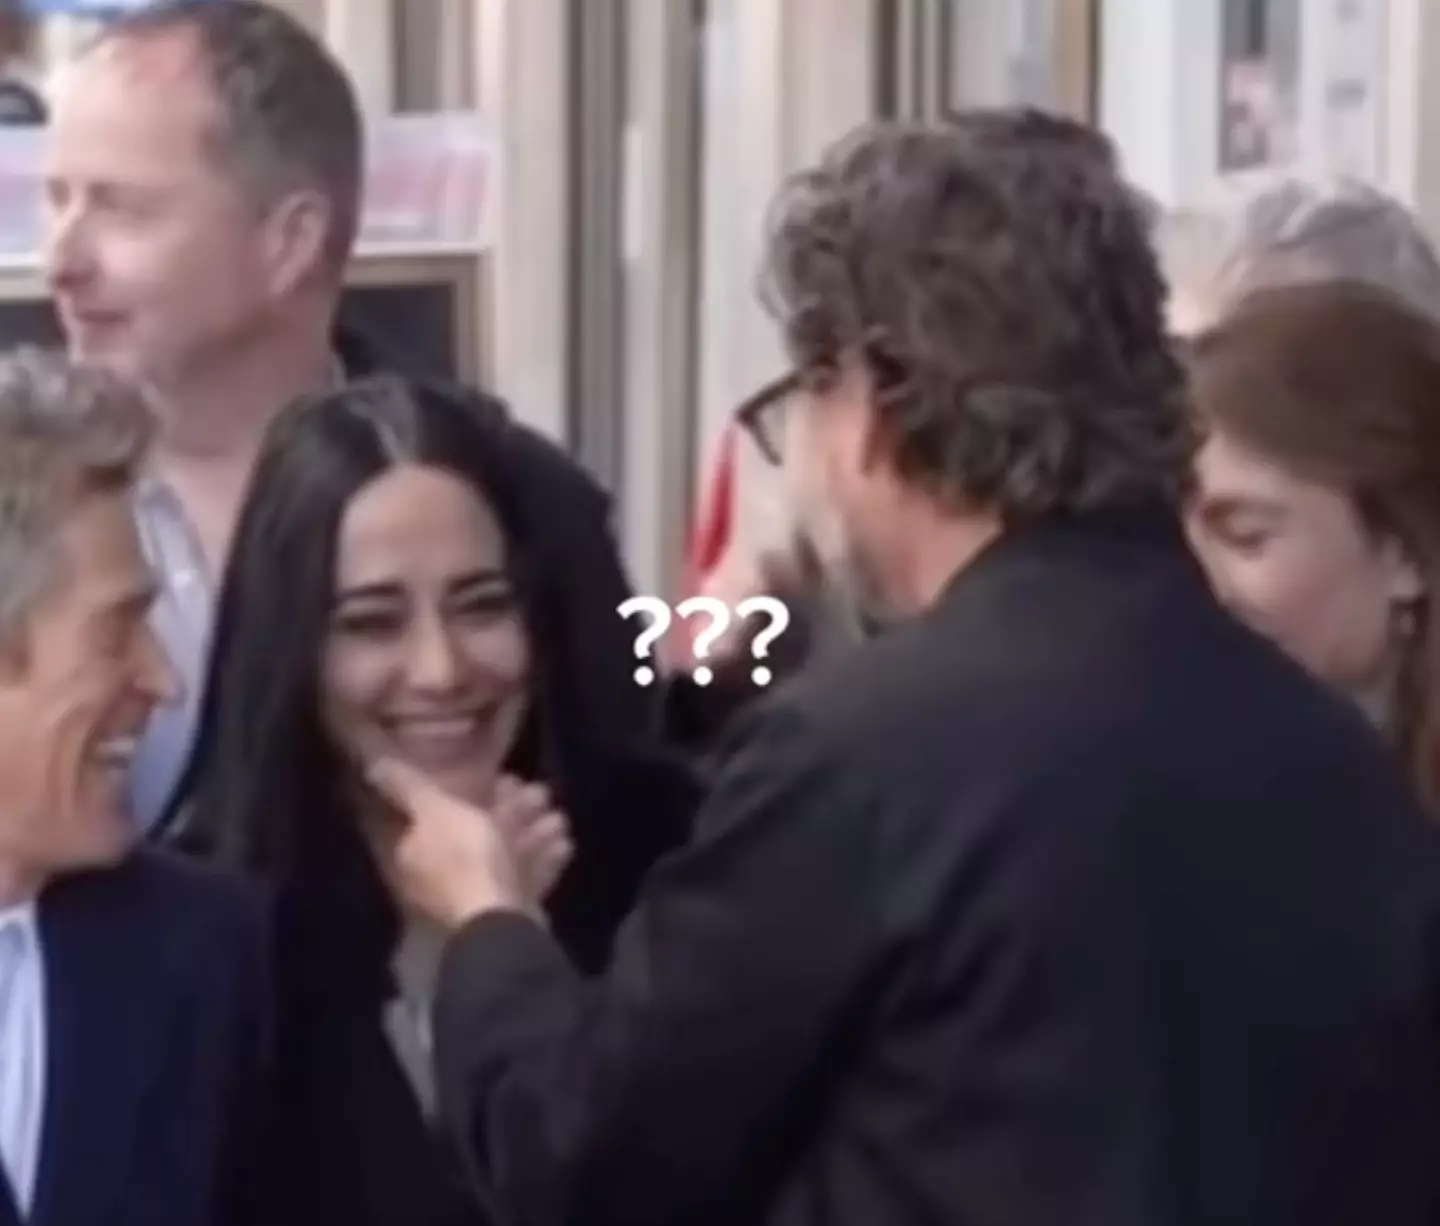 Pedro Pascal was spotted caressing Giada Colagrande's face.